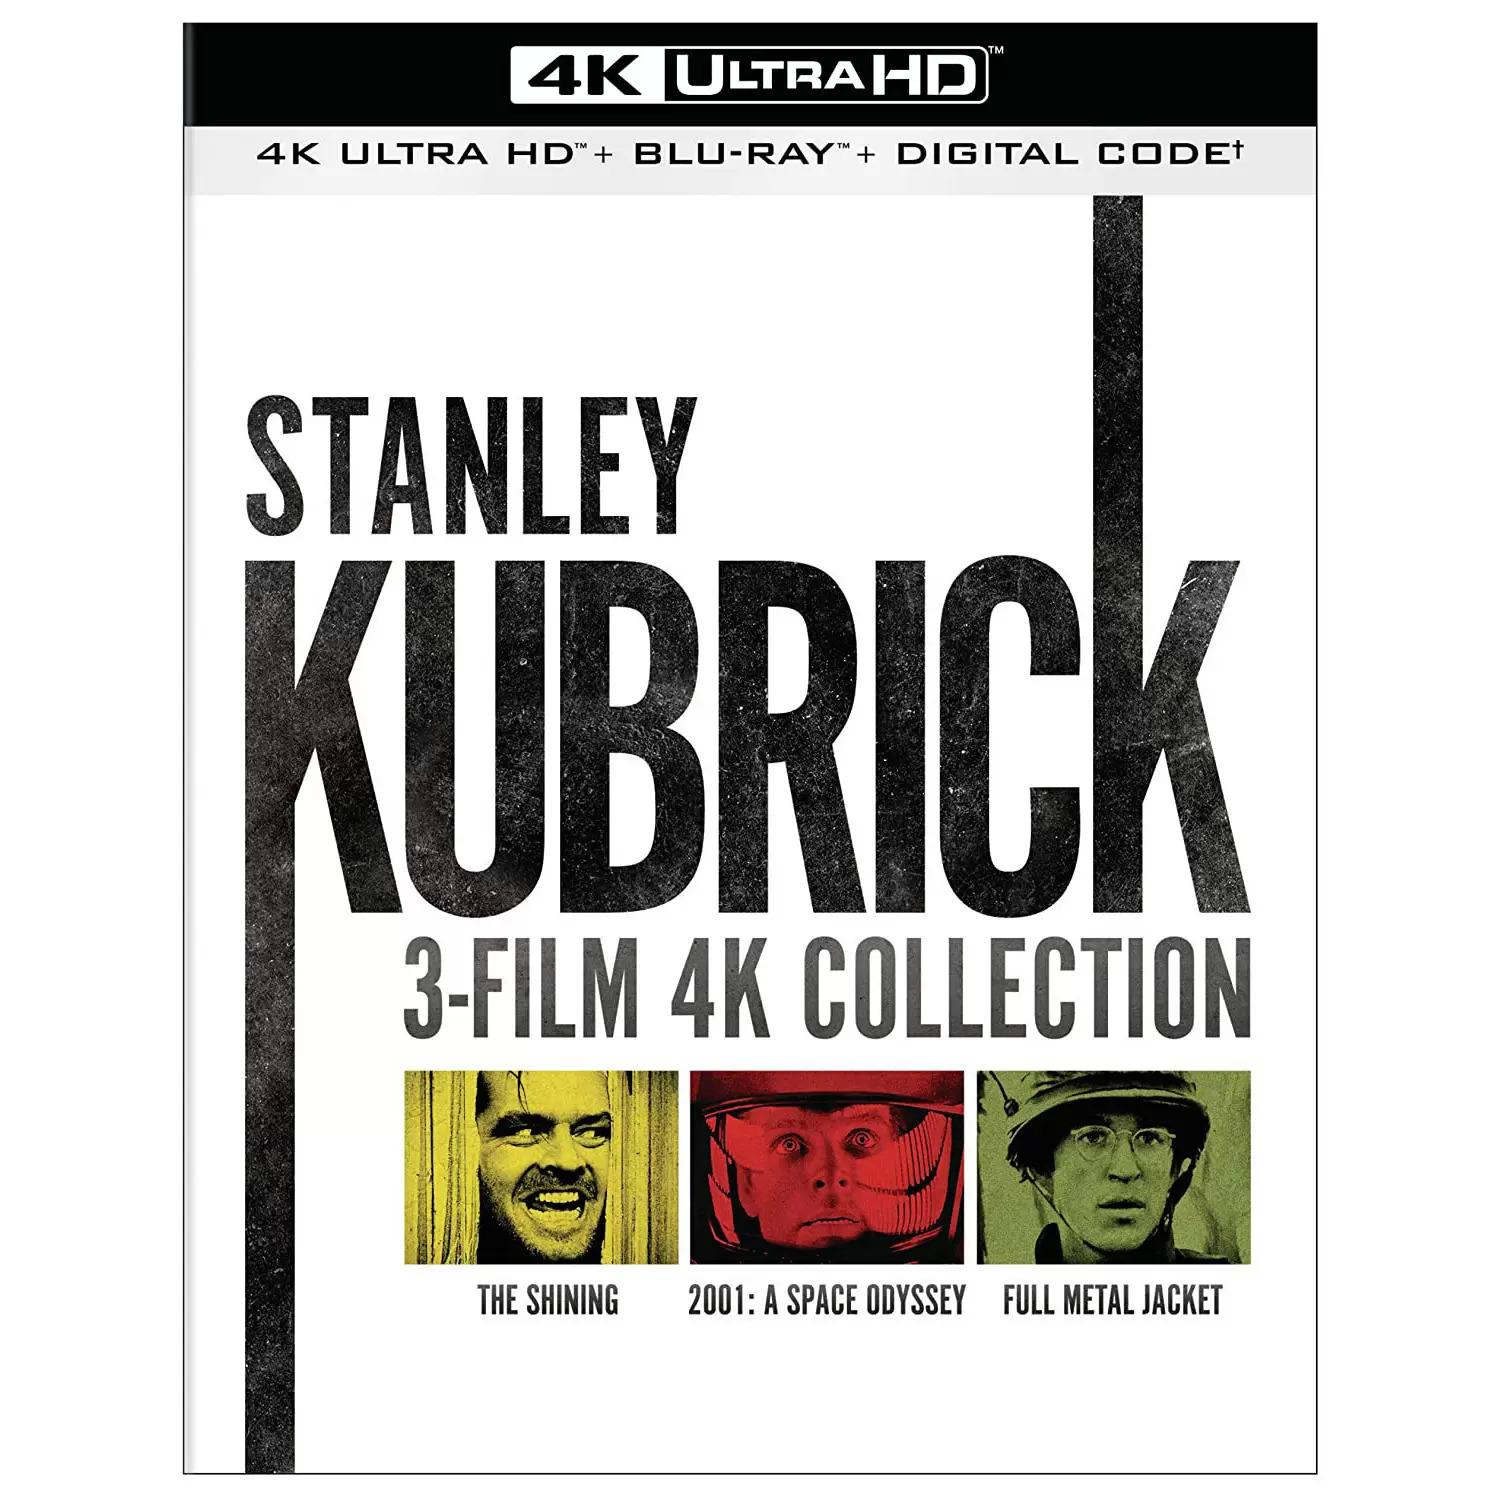 Stanley Kubrick 3-Film Collection 4K Blu-ray for $39.99 Shipped